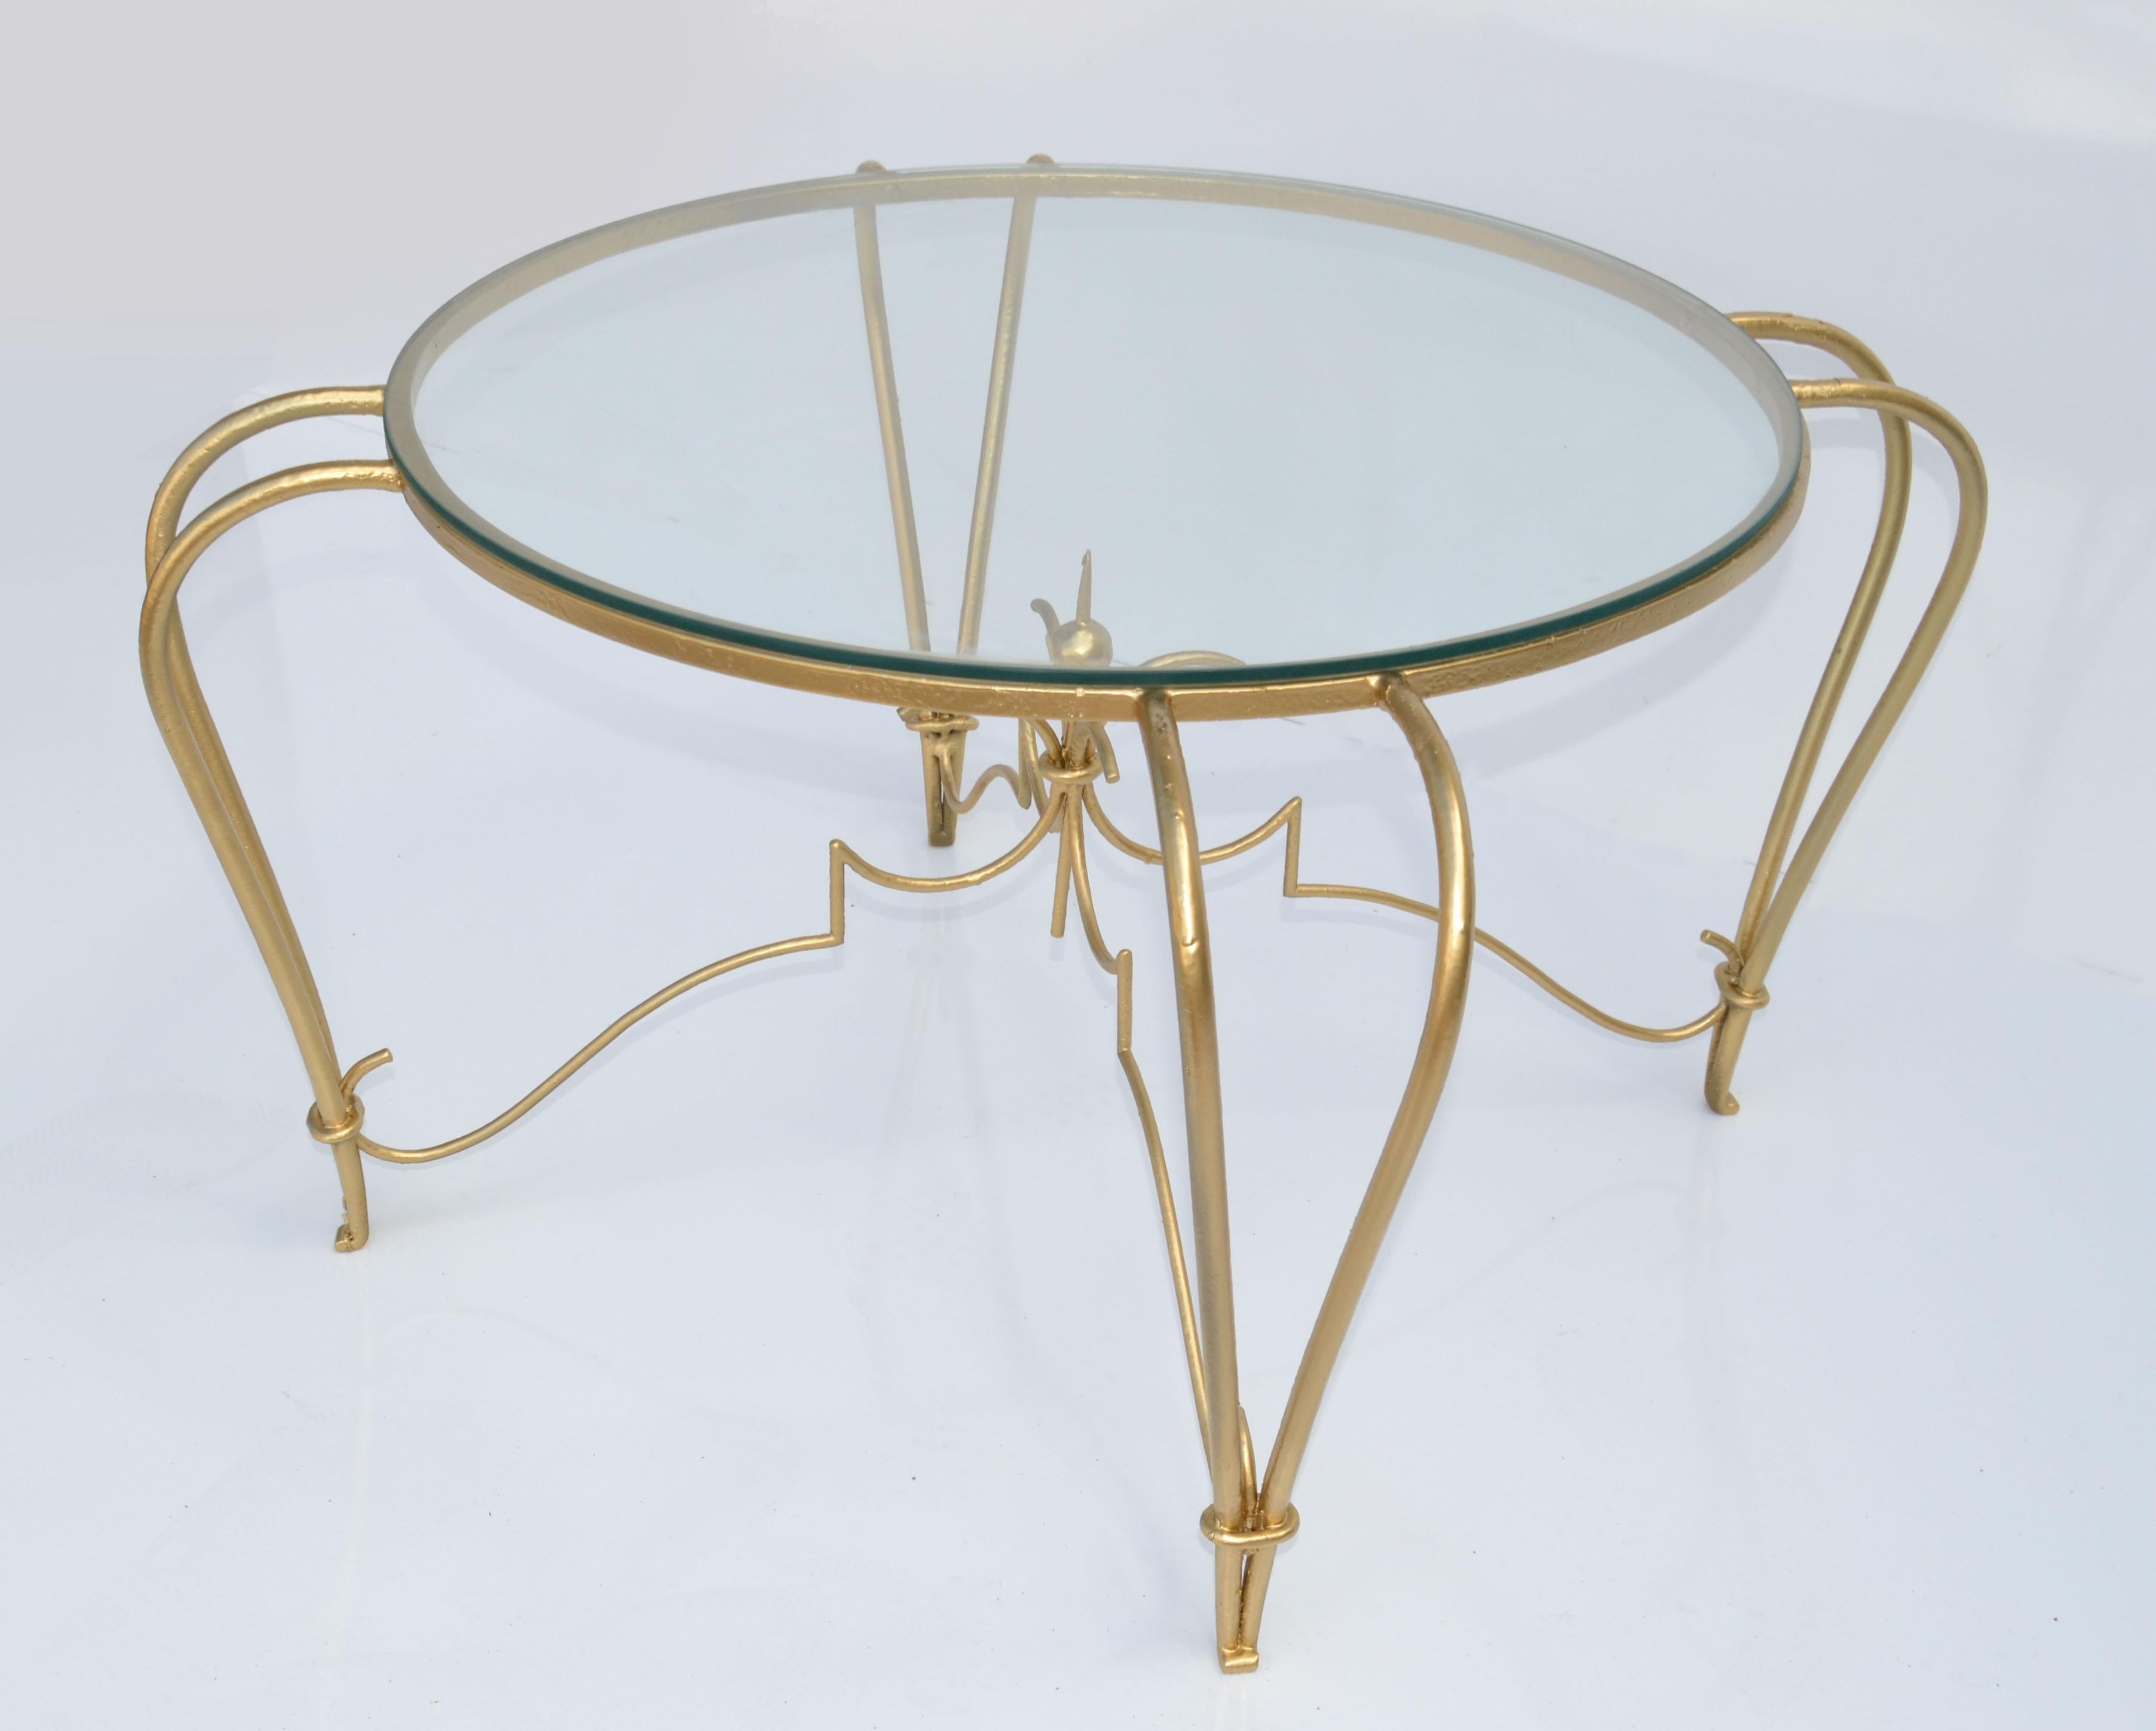 Art Deco Gold Finish Round Wrought Iron & Glass Top Cocktail Table, France, 1950 For Sale 3